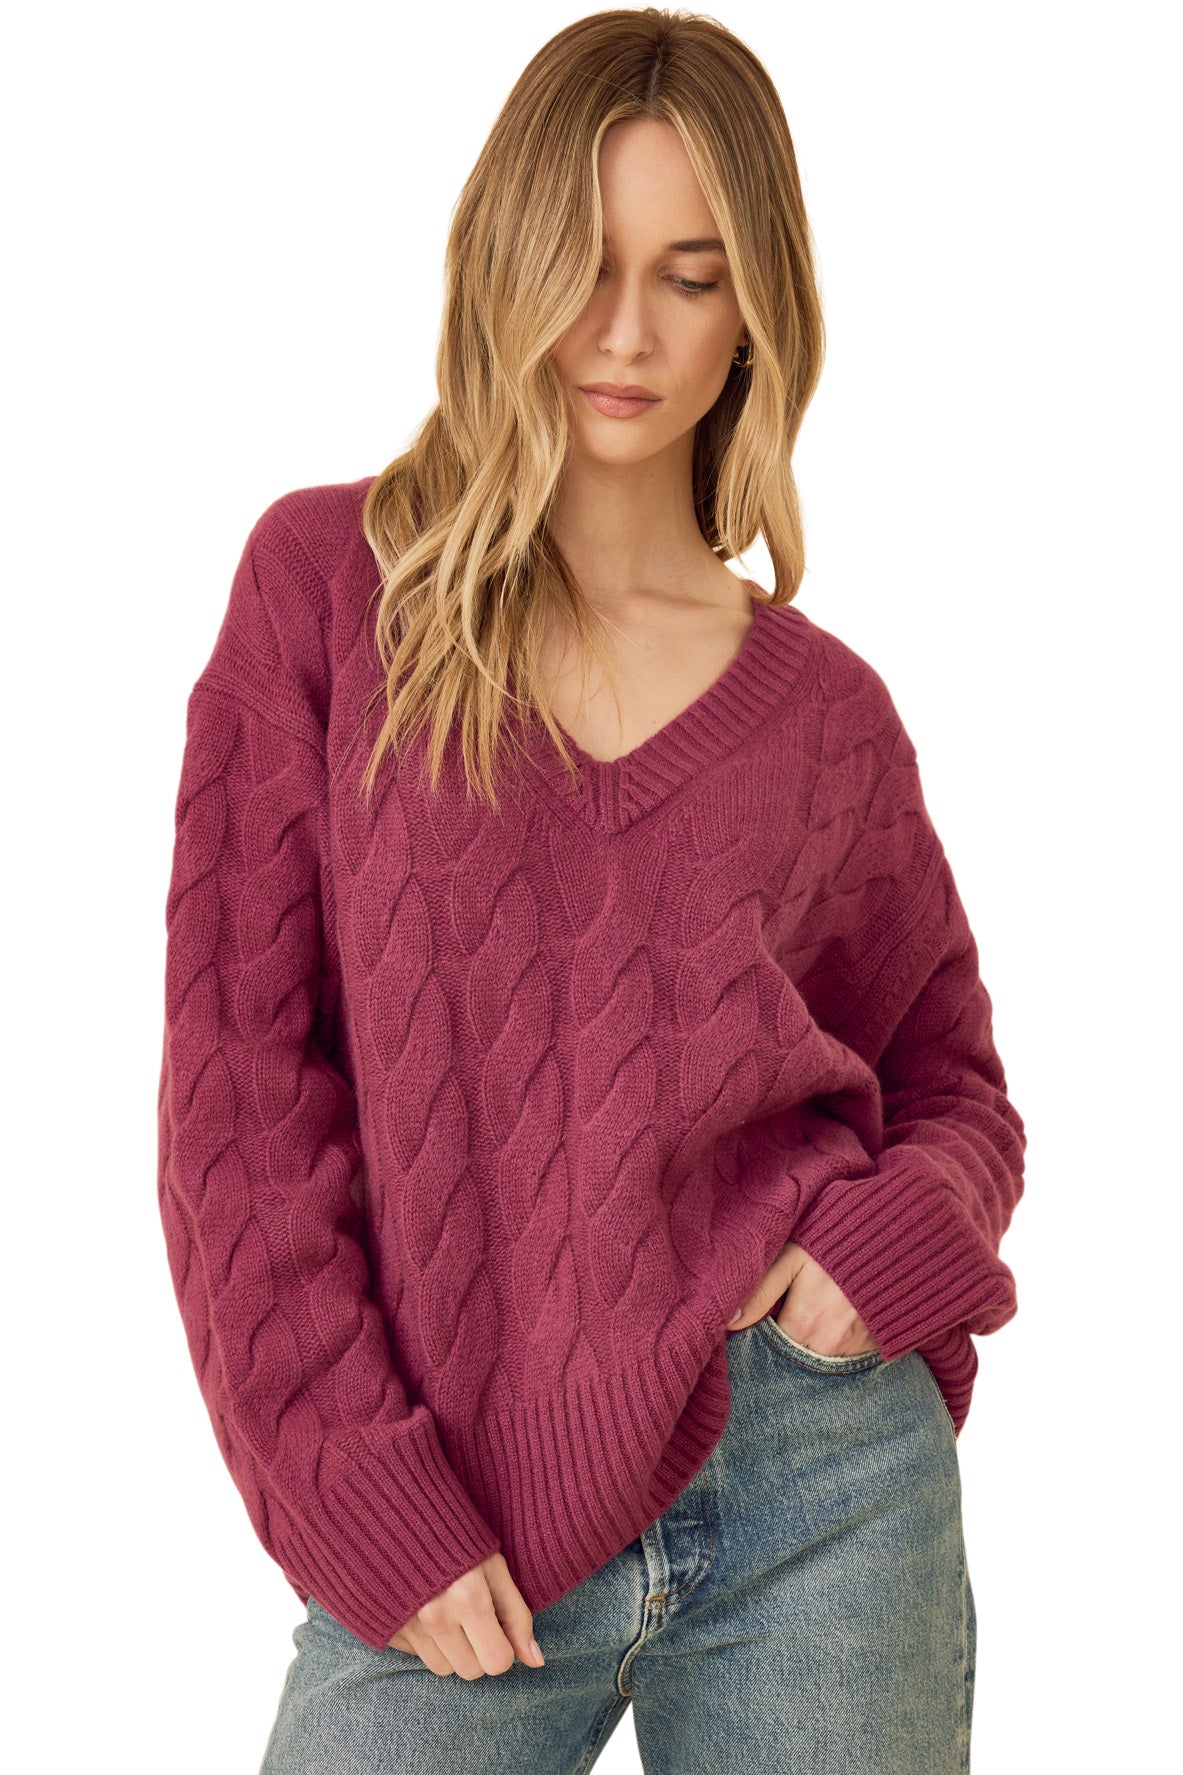 One Grey Day Monterey Cashmere Pullover in Mulberry